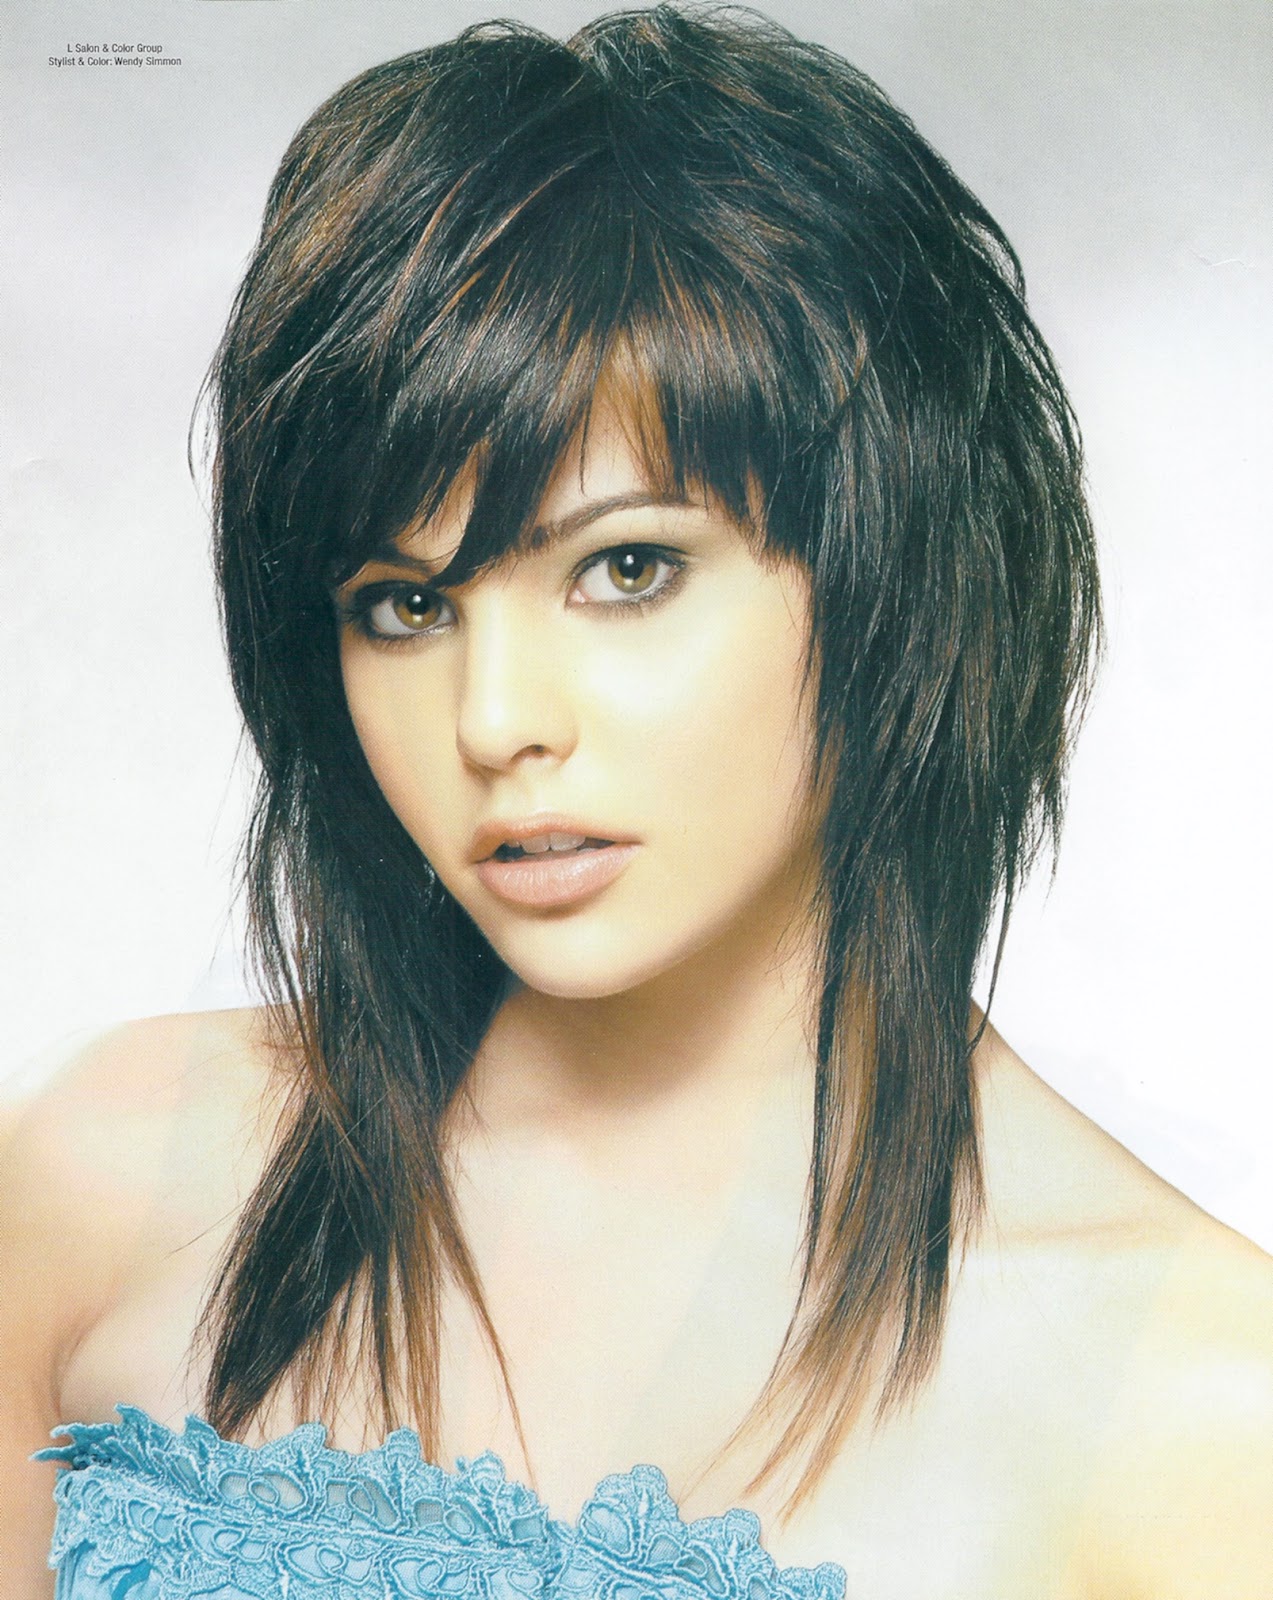 ... Designs And Dresses: Medium Length Haircut And Hairstyles Ideas 2013